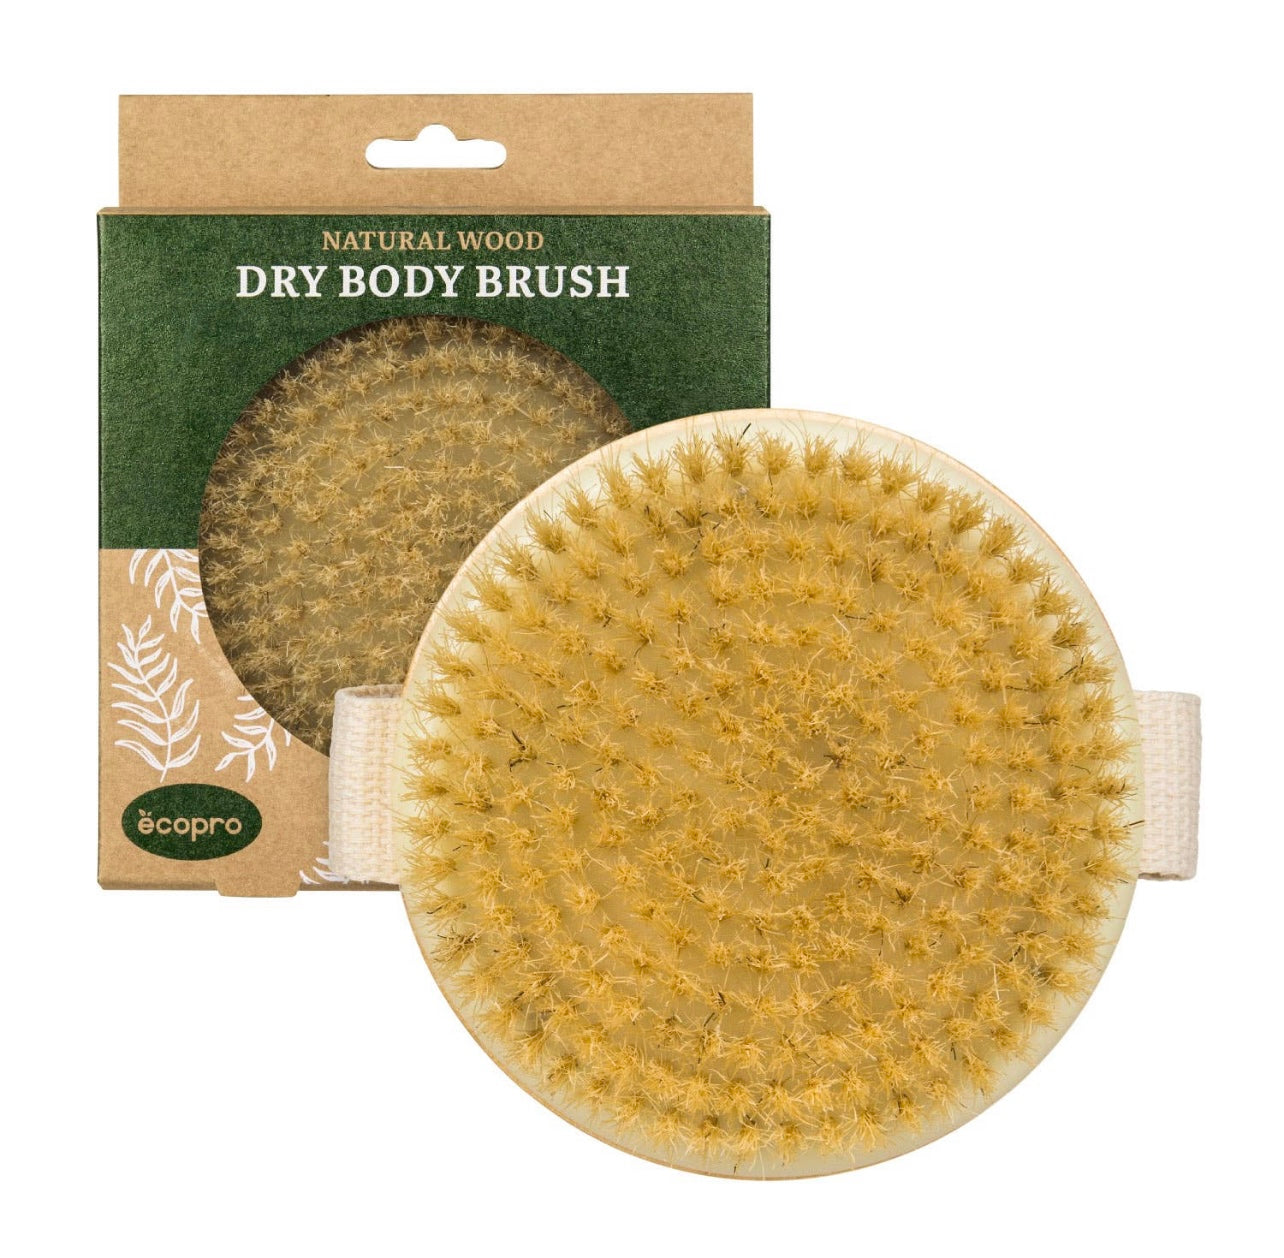 Ecopro Natural Wood Dry Body Brush